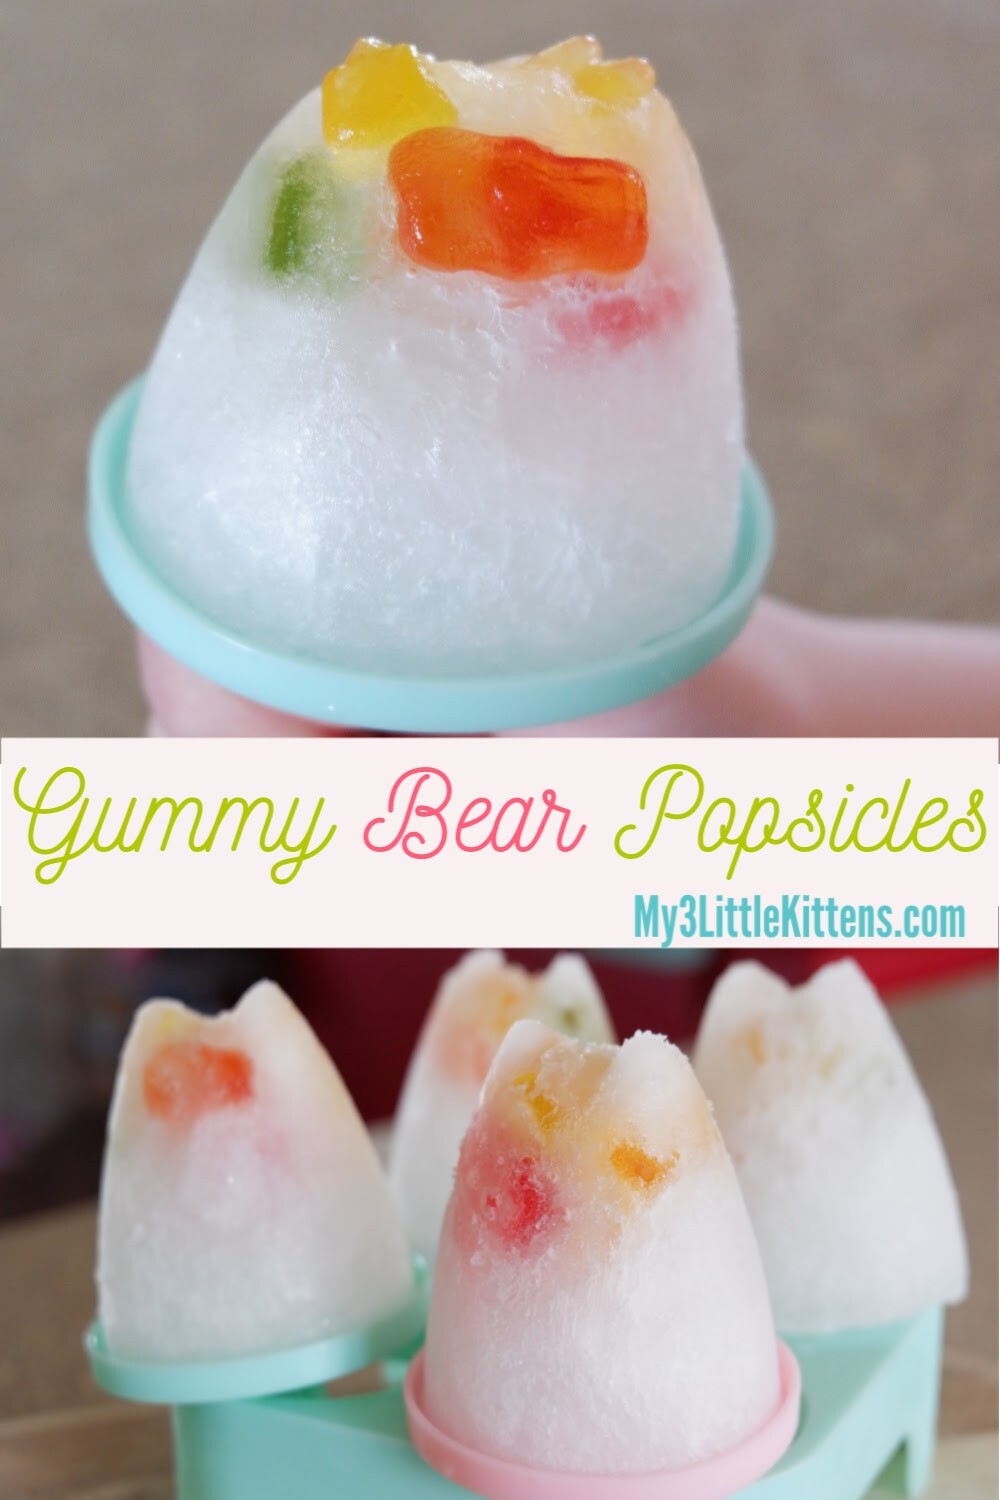 How to Make Gummy Bear Popsicles with Sprite or 7up Recipe! They are Kid Friendly and Easy to Make!